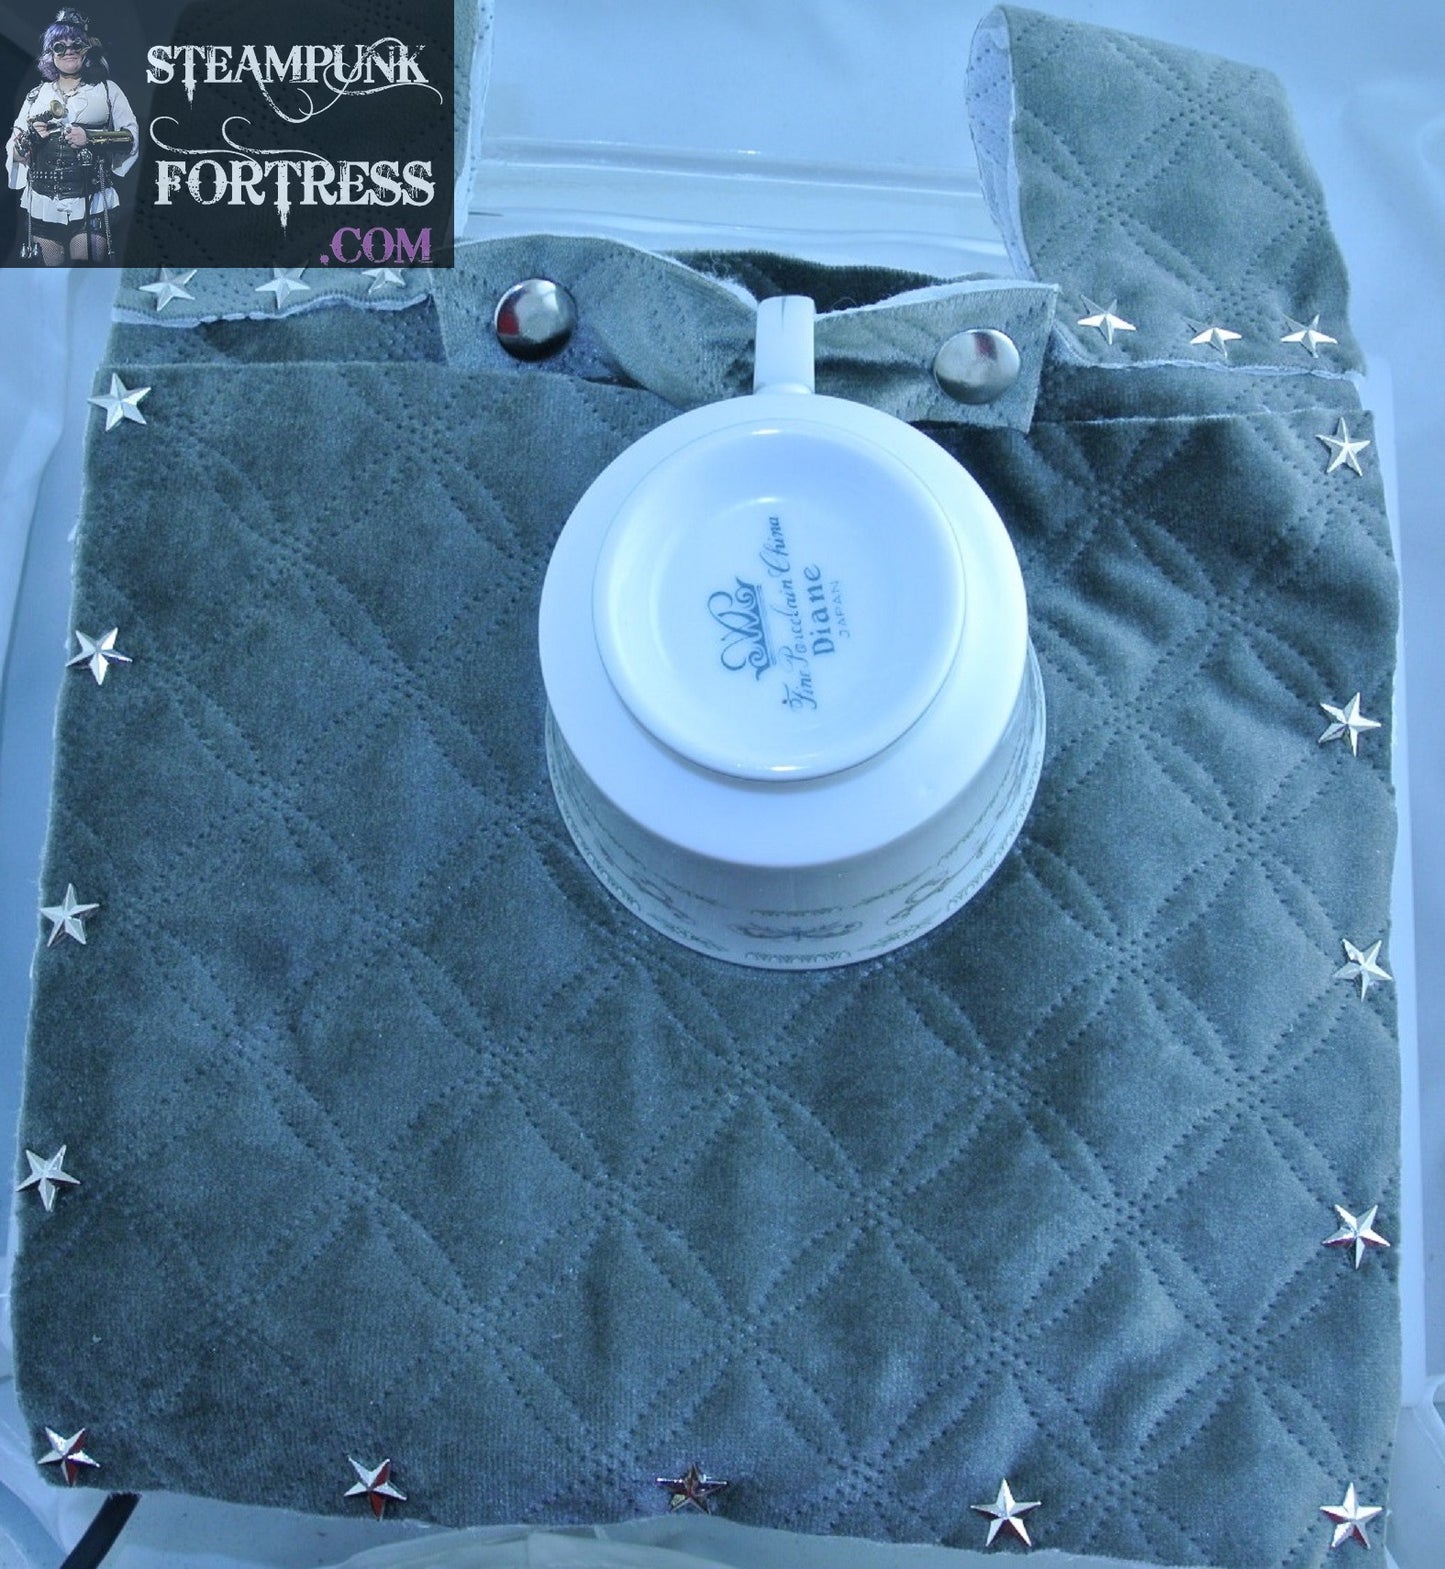 TEA CUP HOLDER QUILTED SILVER STAR RIVETS BLUE WHITE DIANE SET HOLSTER SAUCER TEA DUELING DUELLING STARR WILDE STEAMPUNK FORTRESS COSPLAY COSTUME